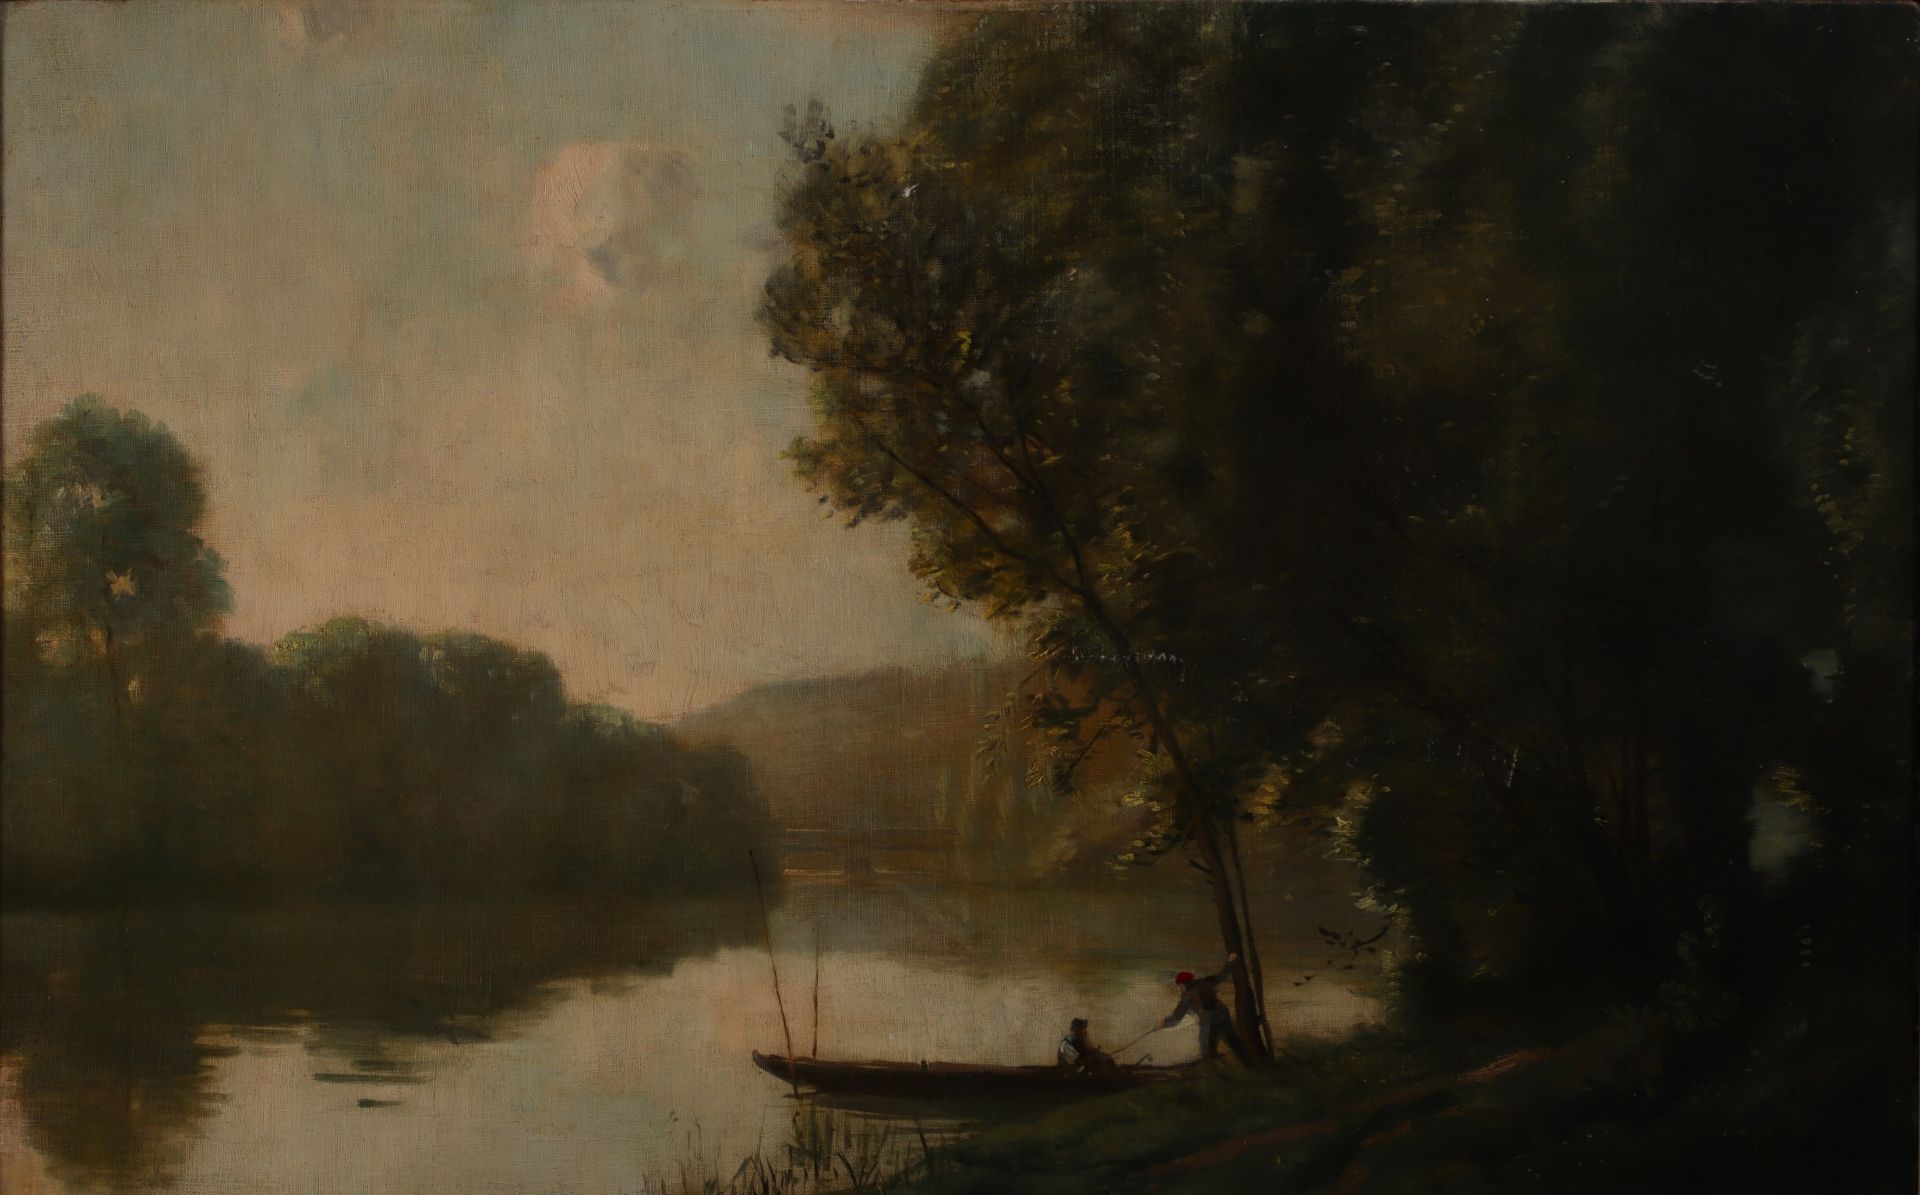 "Oil on canvas, Barbizon school in the style of Camille COROT, late 19th century.